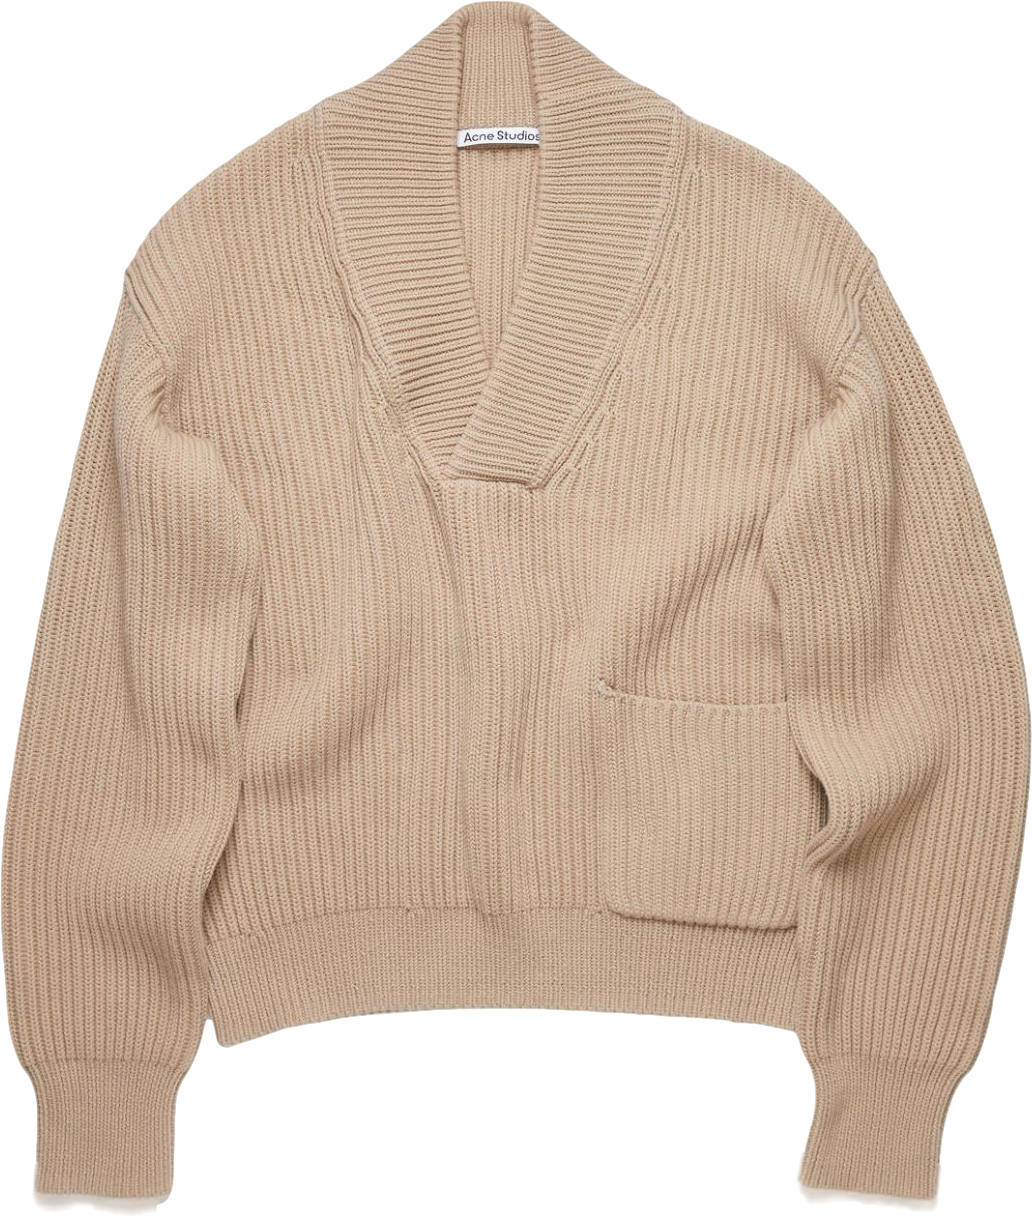 Acne Studios Beige Ribbed Cotton Blend Relaxed Fit Jumper UK XS